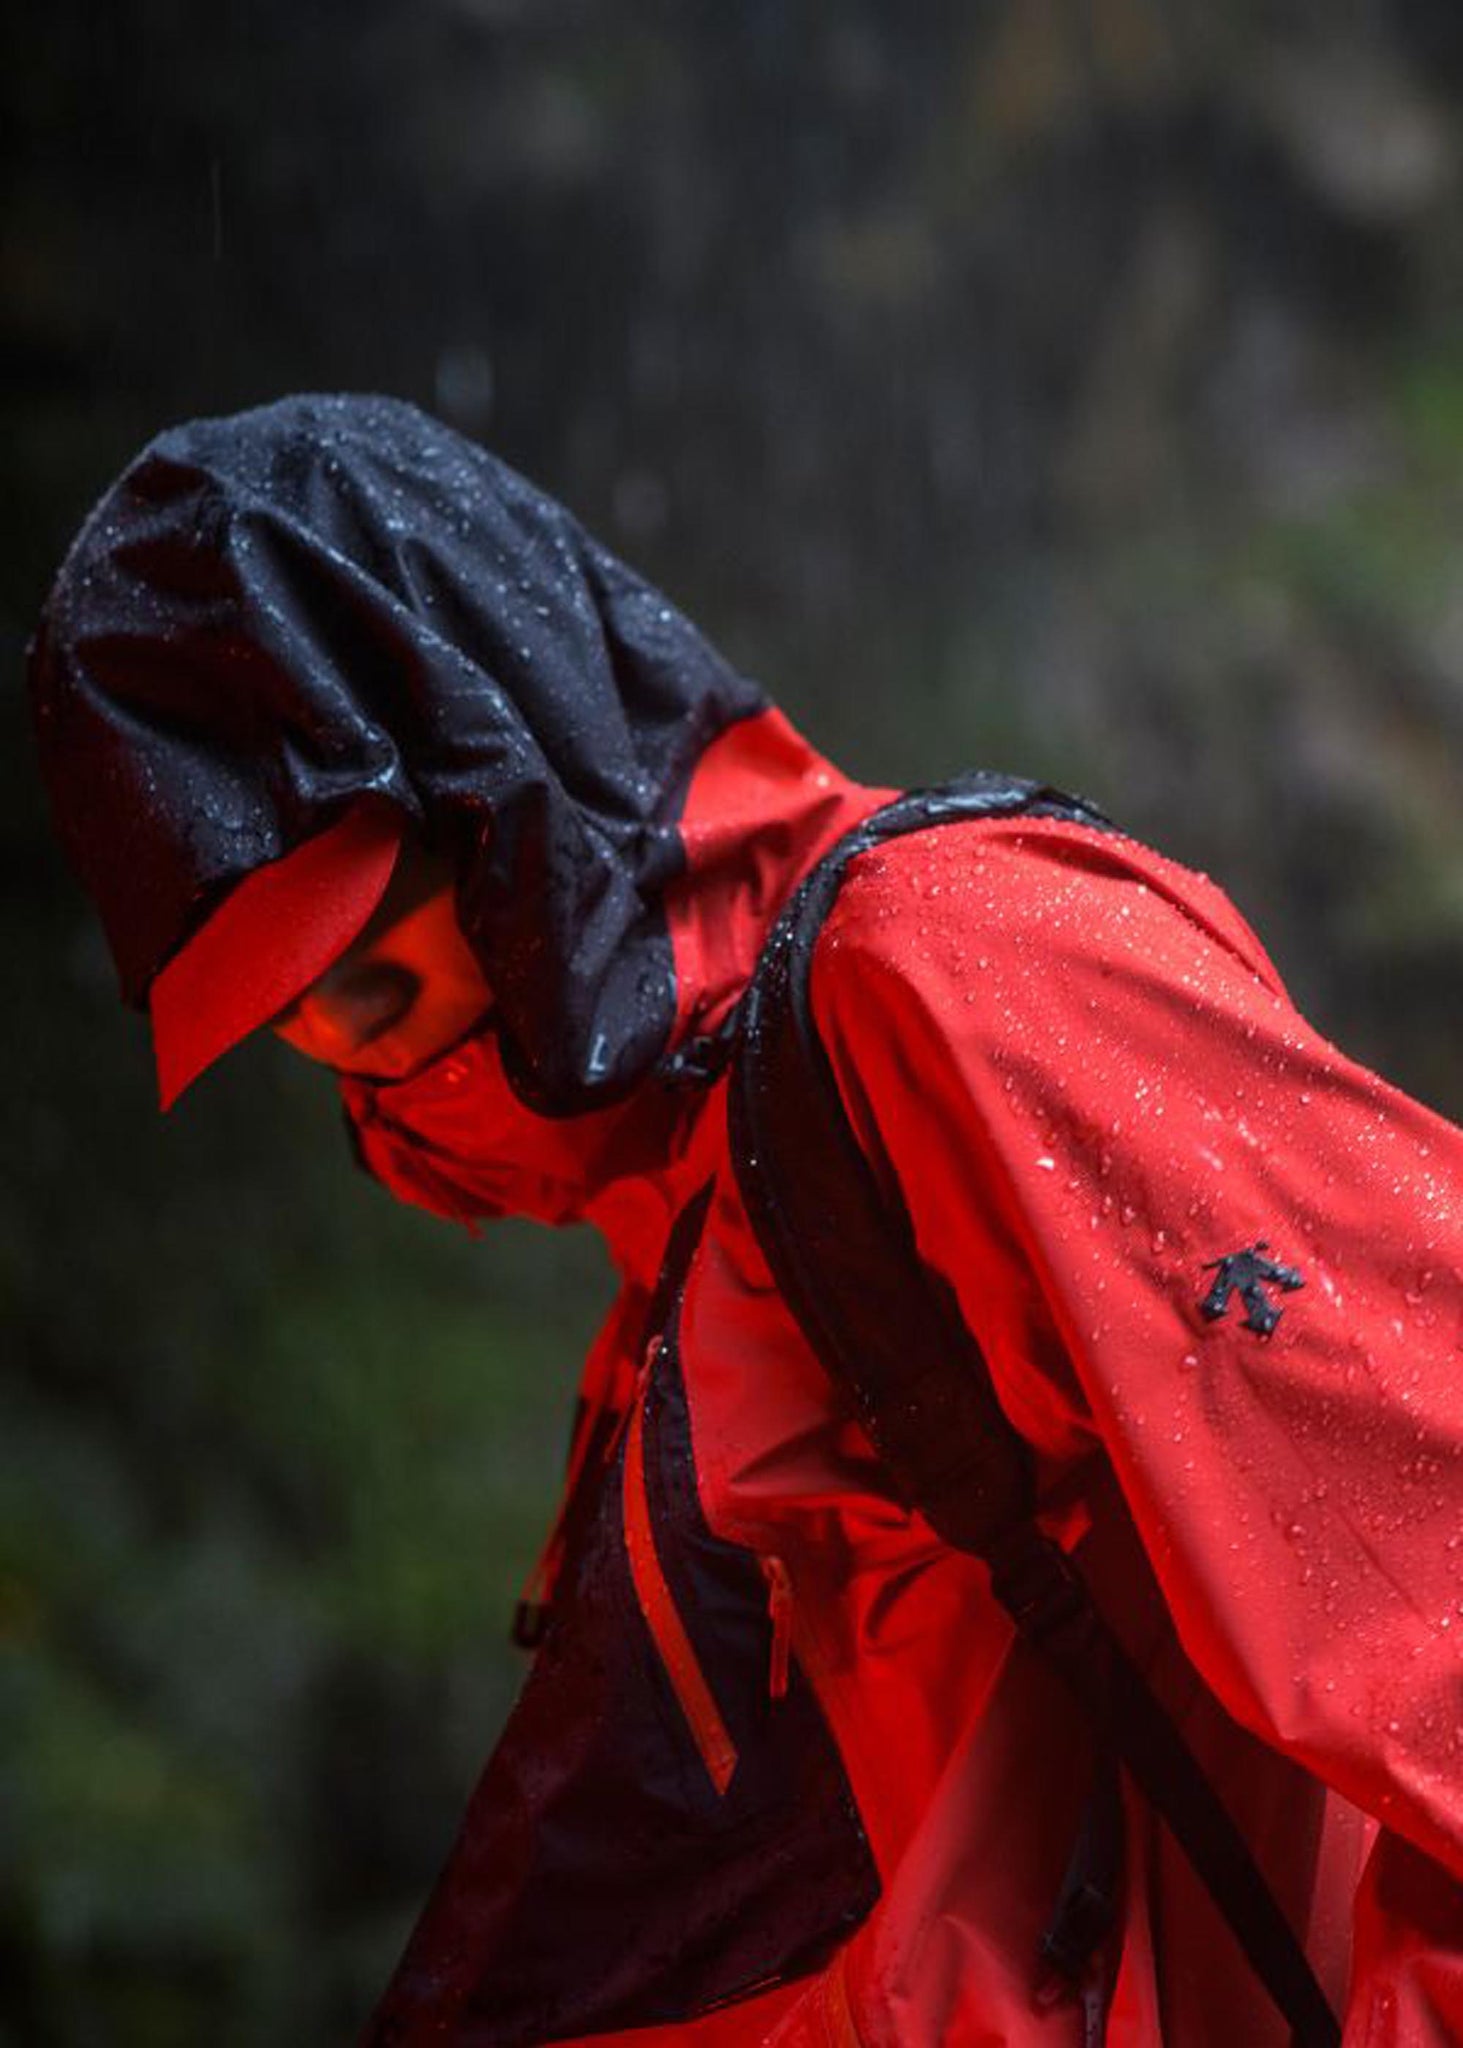 Red GORE-TEX Shell Jacket